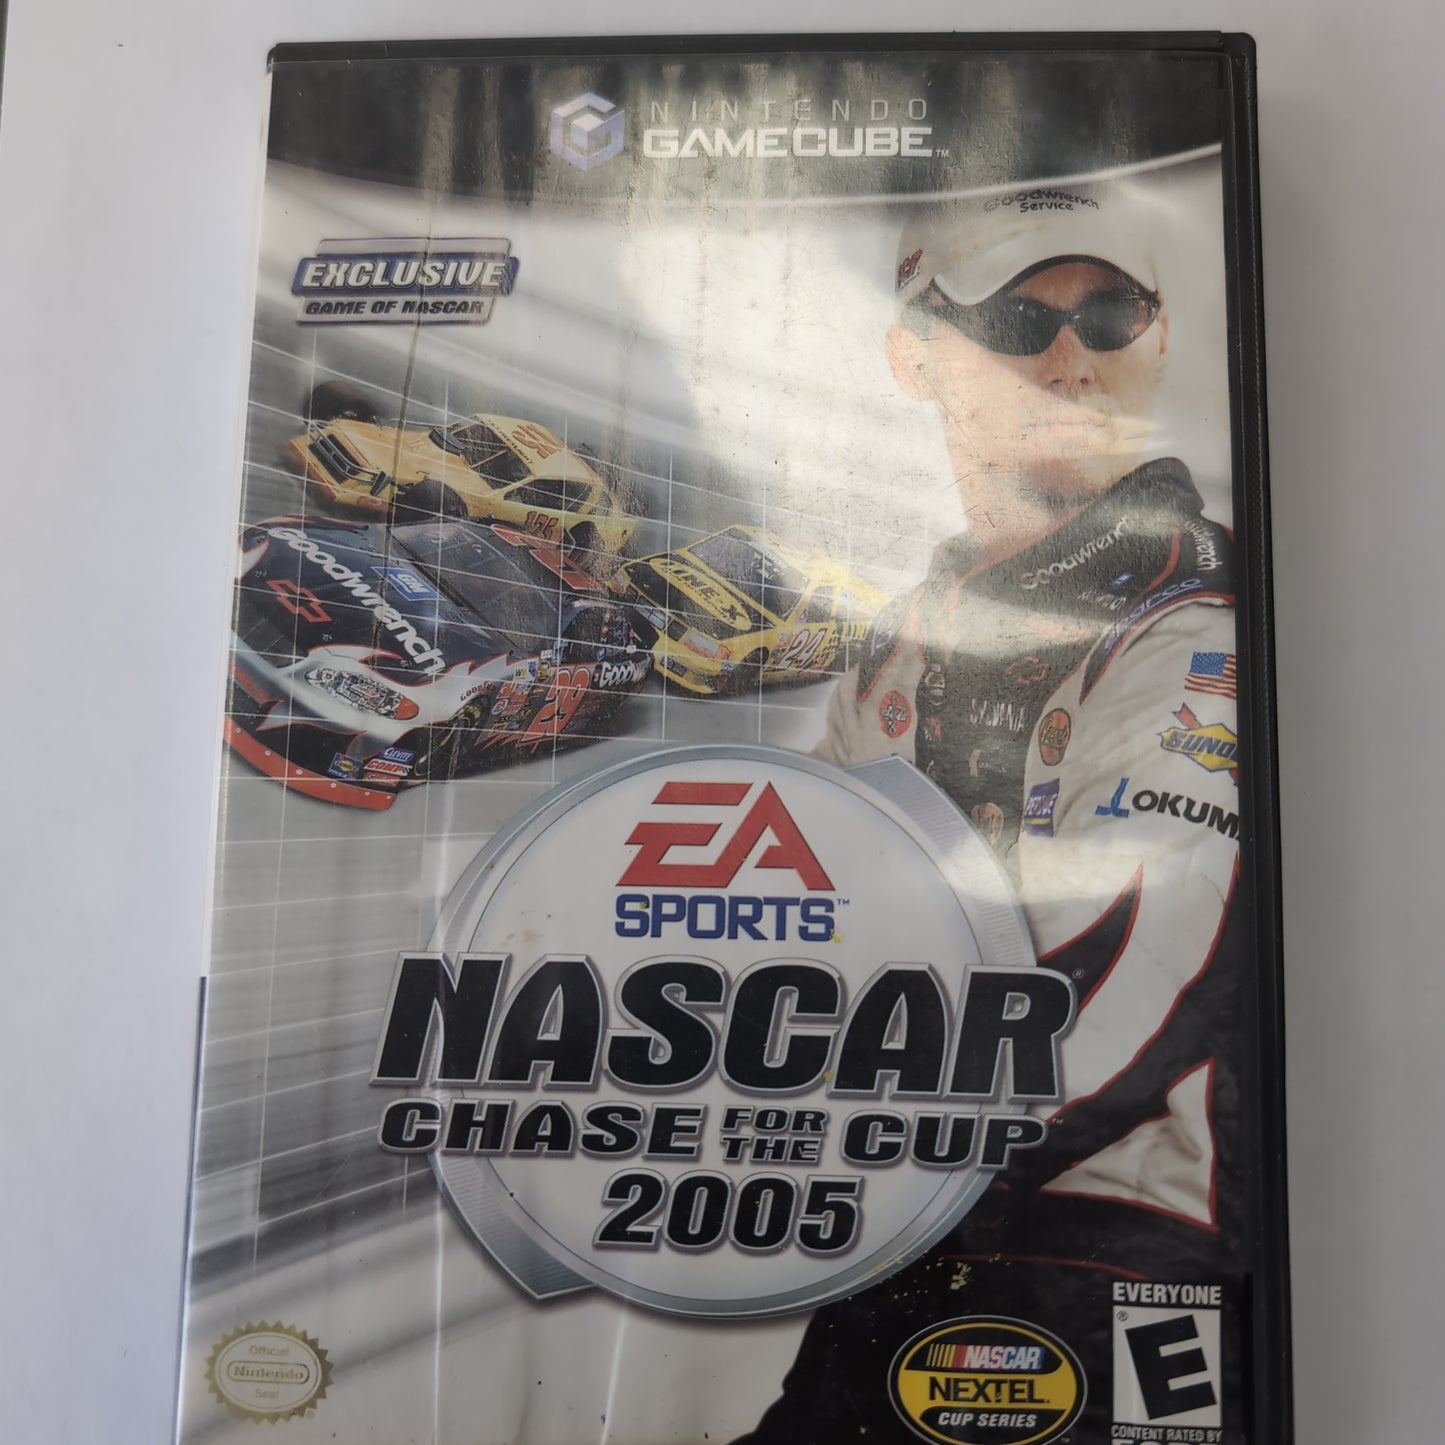 Nascar Chase for the Cup 2005 (GC)